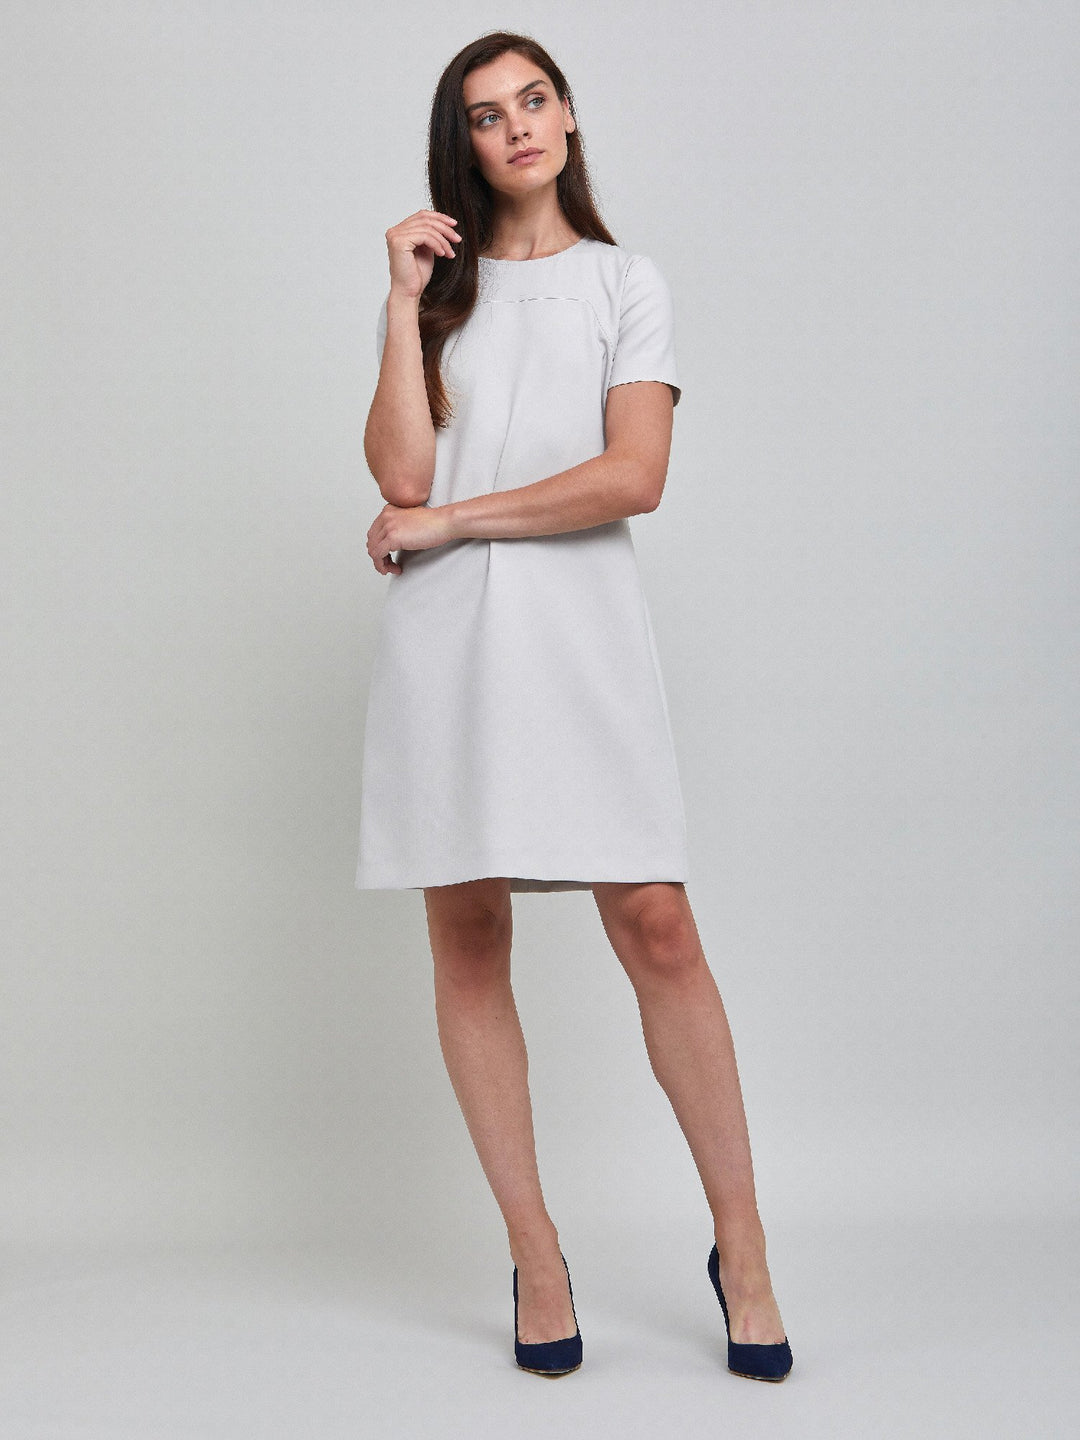 Marina, an elegant A-line dress, fabricated in ligth silver double crepe. An expertly tailored form flattering silhouette that falls right over-the-knee, with a hint of elastane to ensure comfort & ease of movement. 